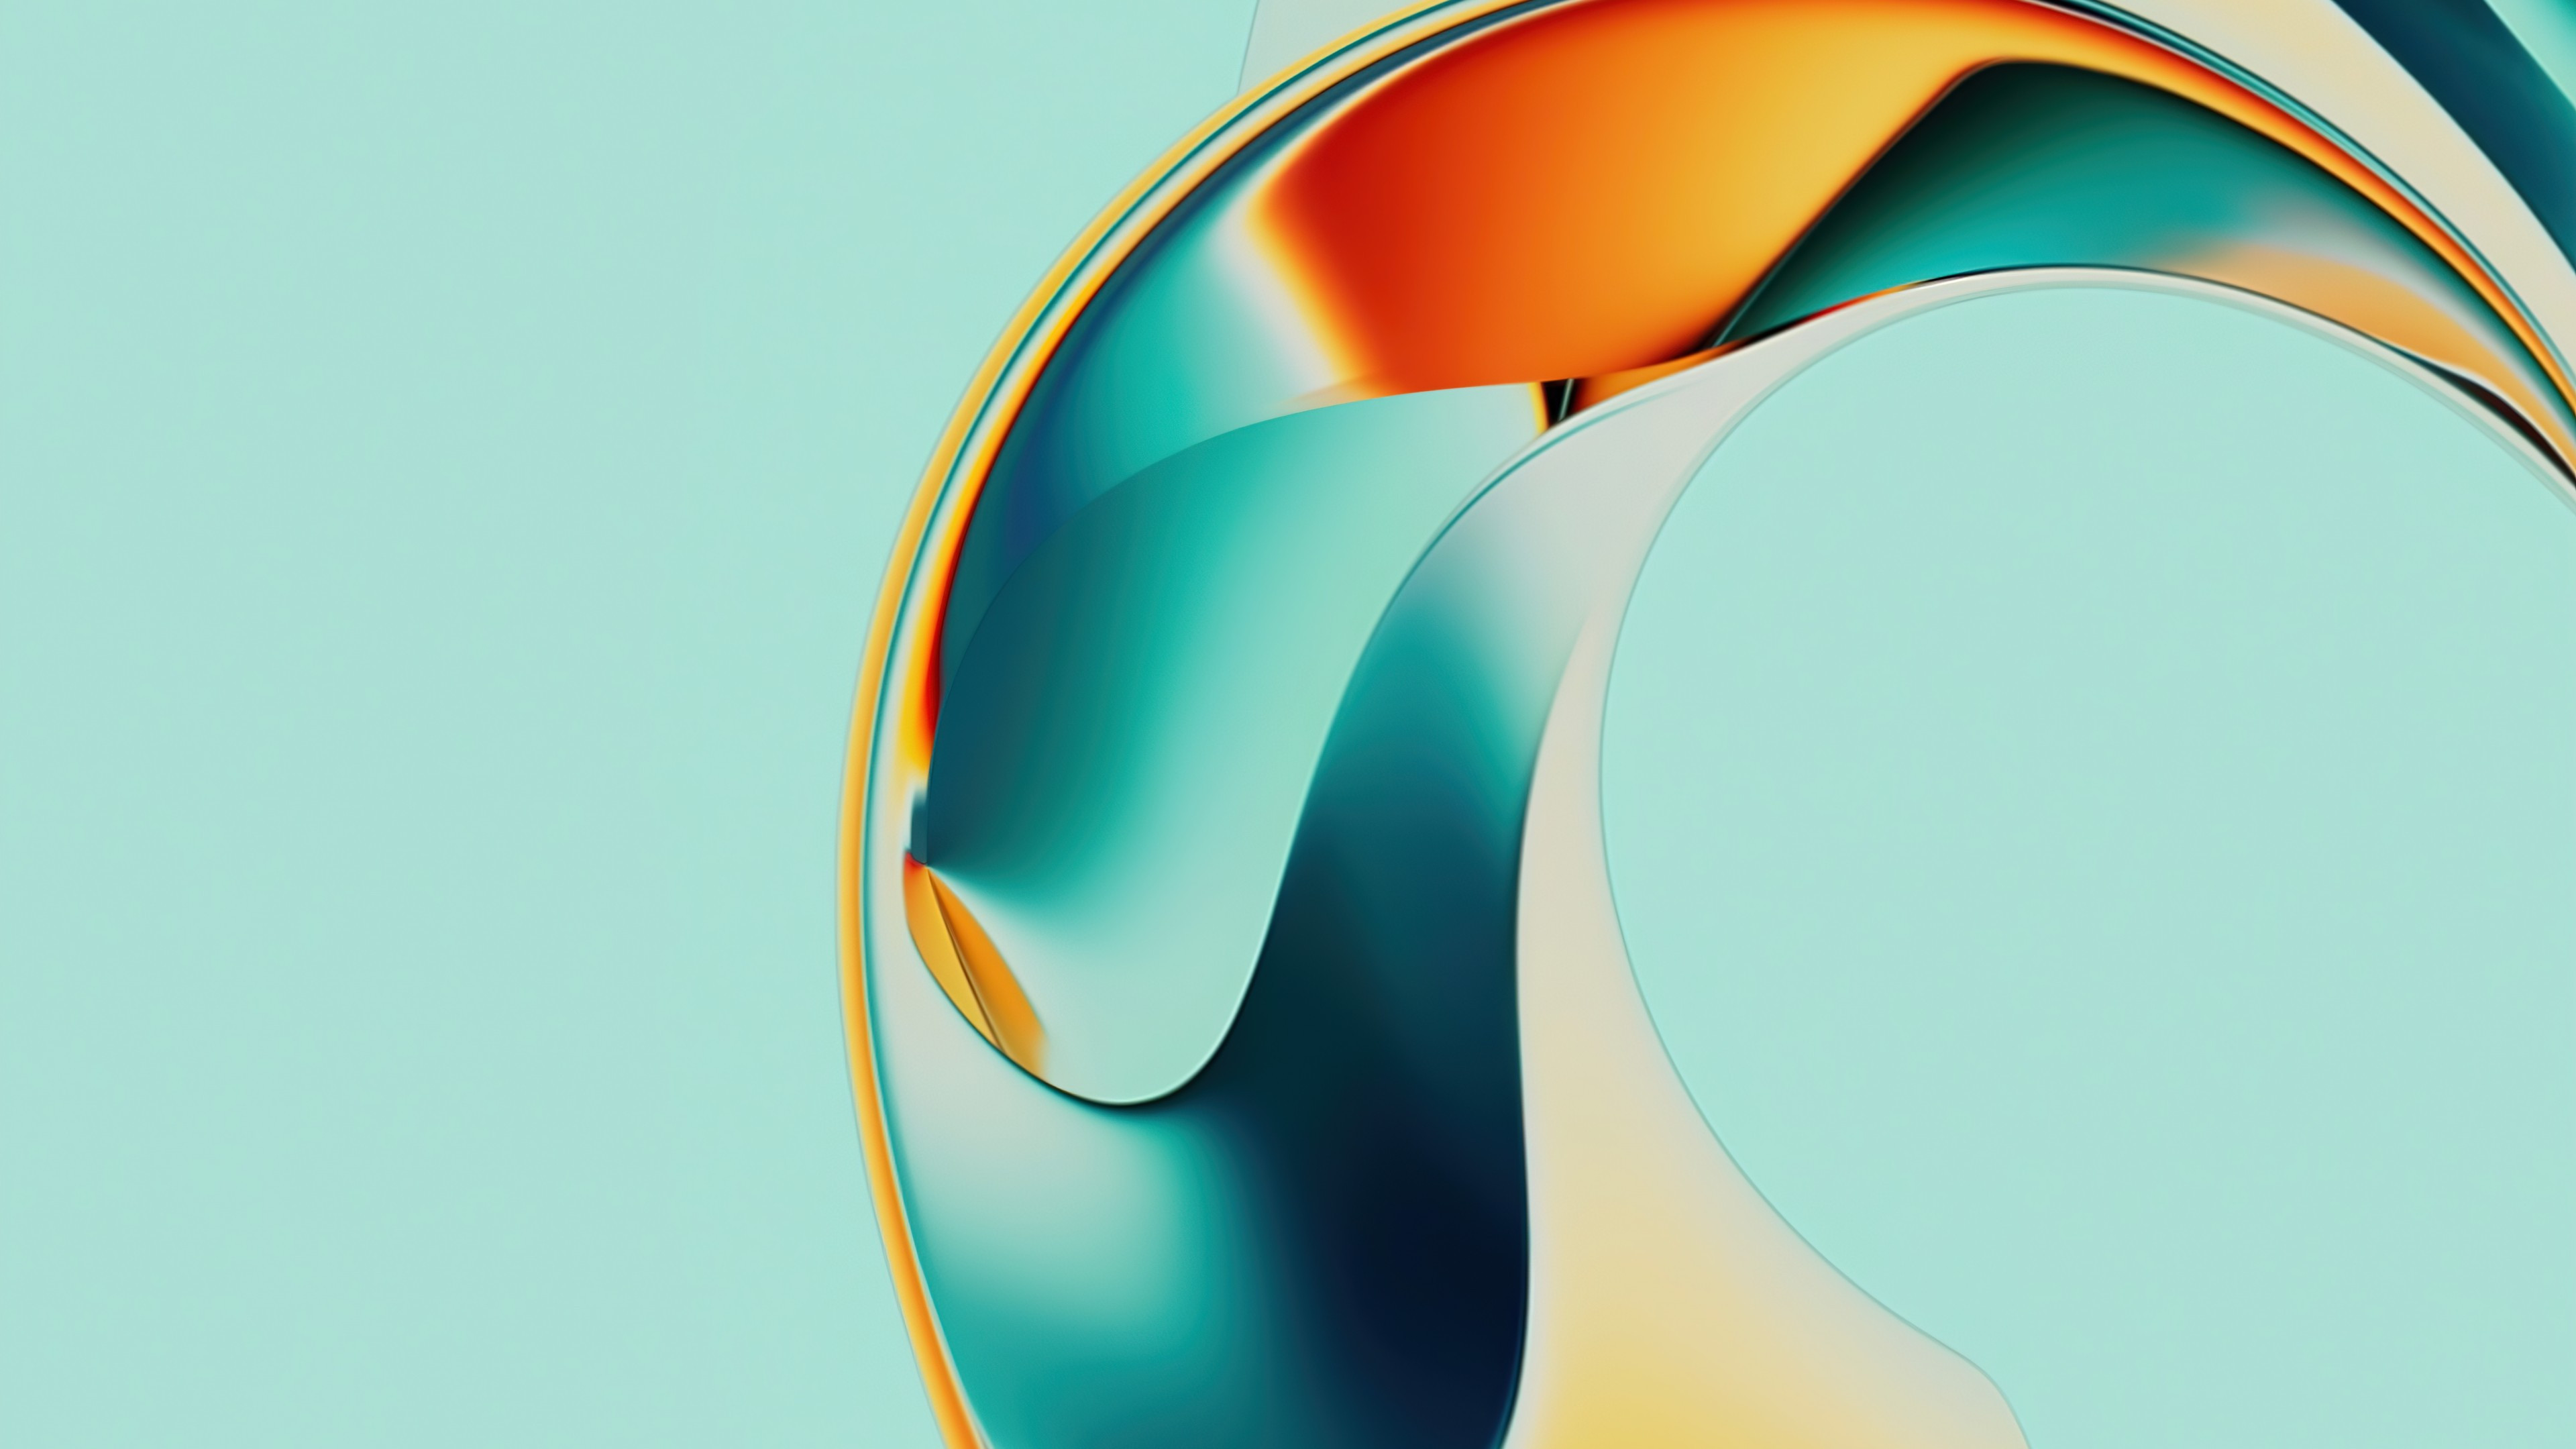 Abstract design in P60 Pro wallpaper 3840x2160